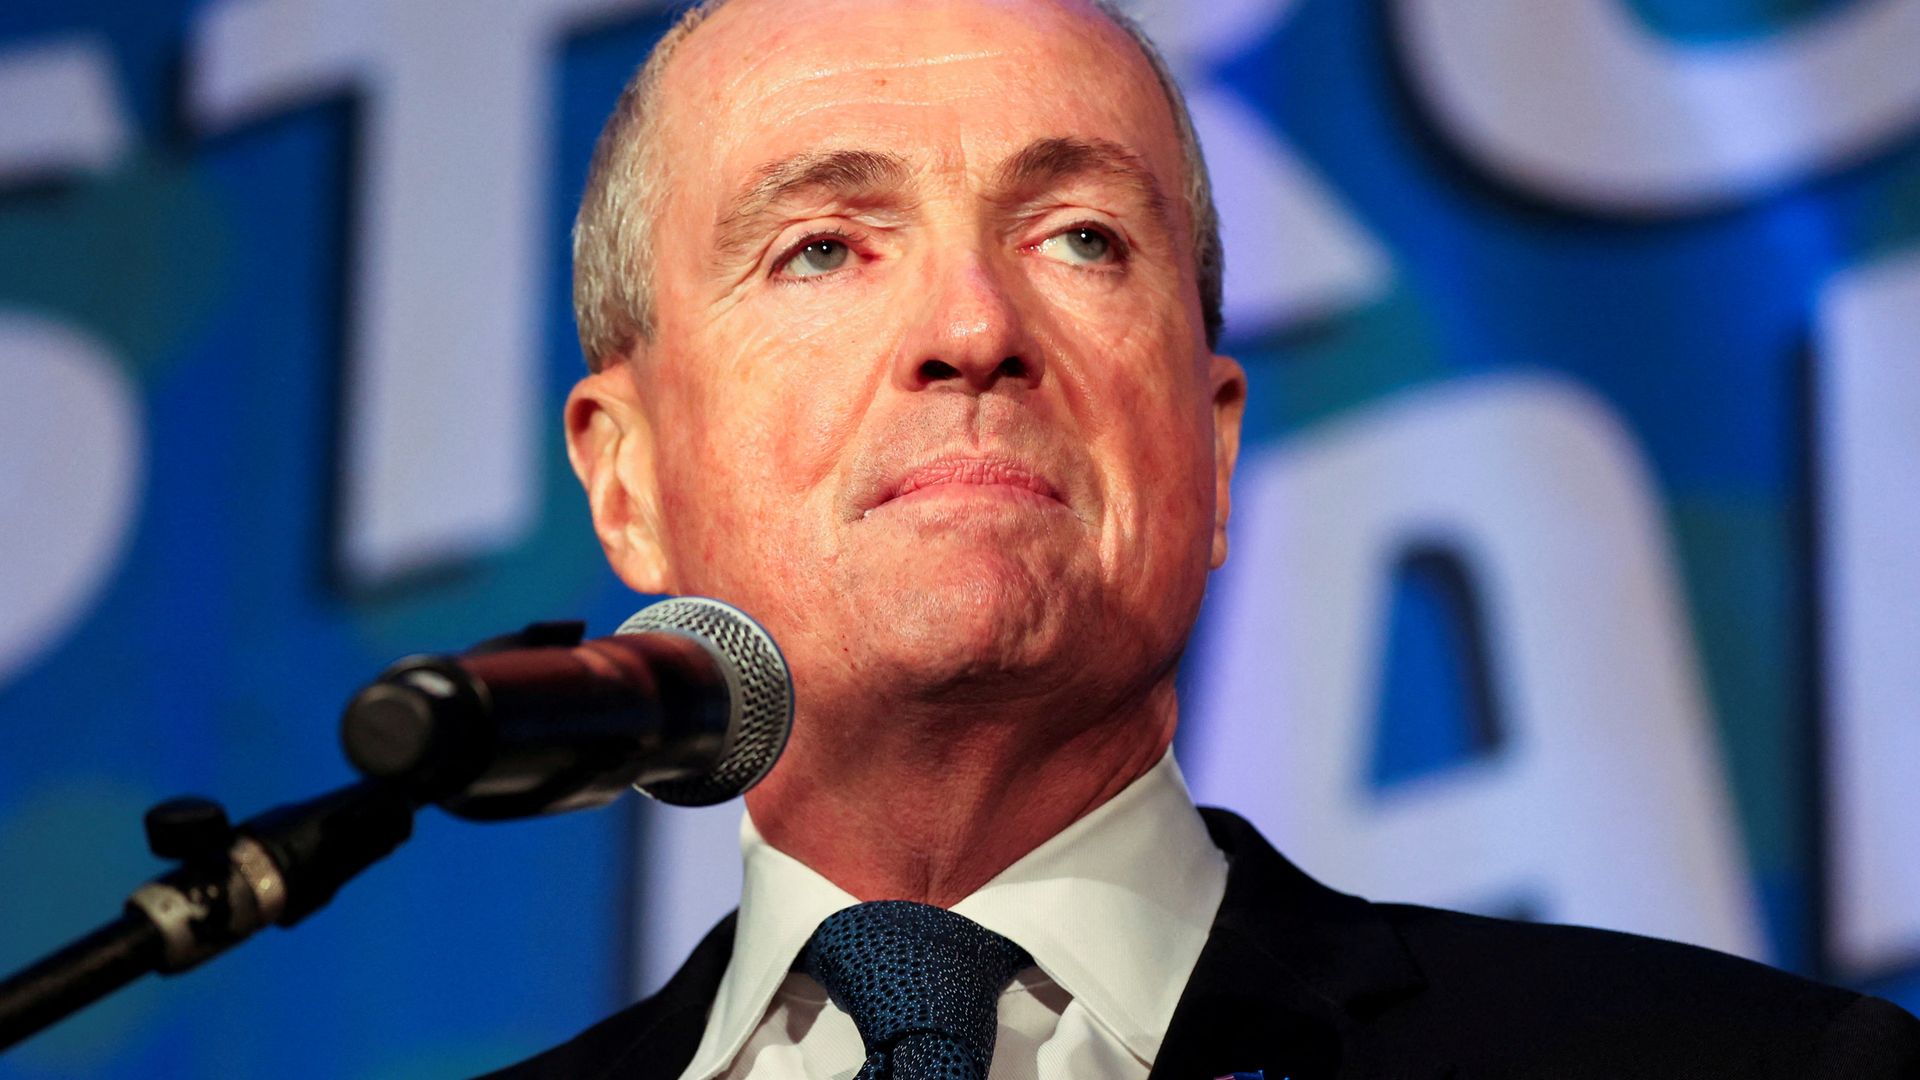 New Jersey Gov. Phil Murphy spent nearly ,000 of taxpayer money at MetLife stadium events, including a Taylor Swift concert.